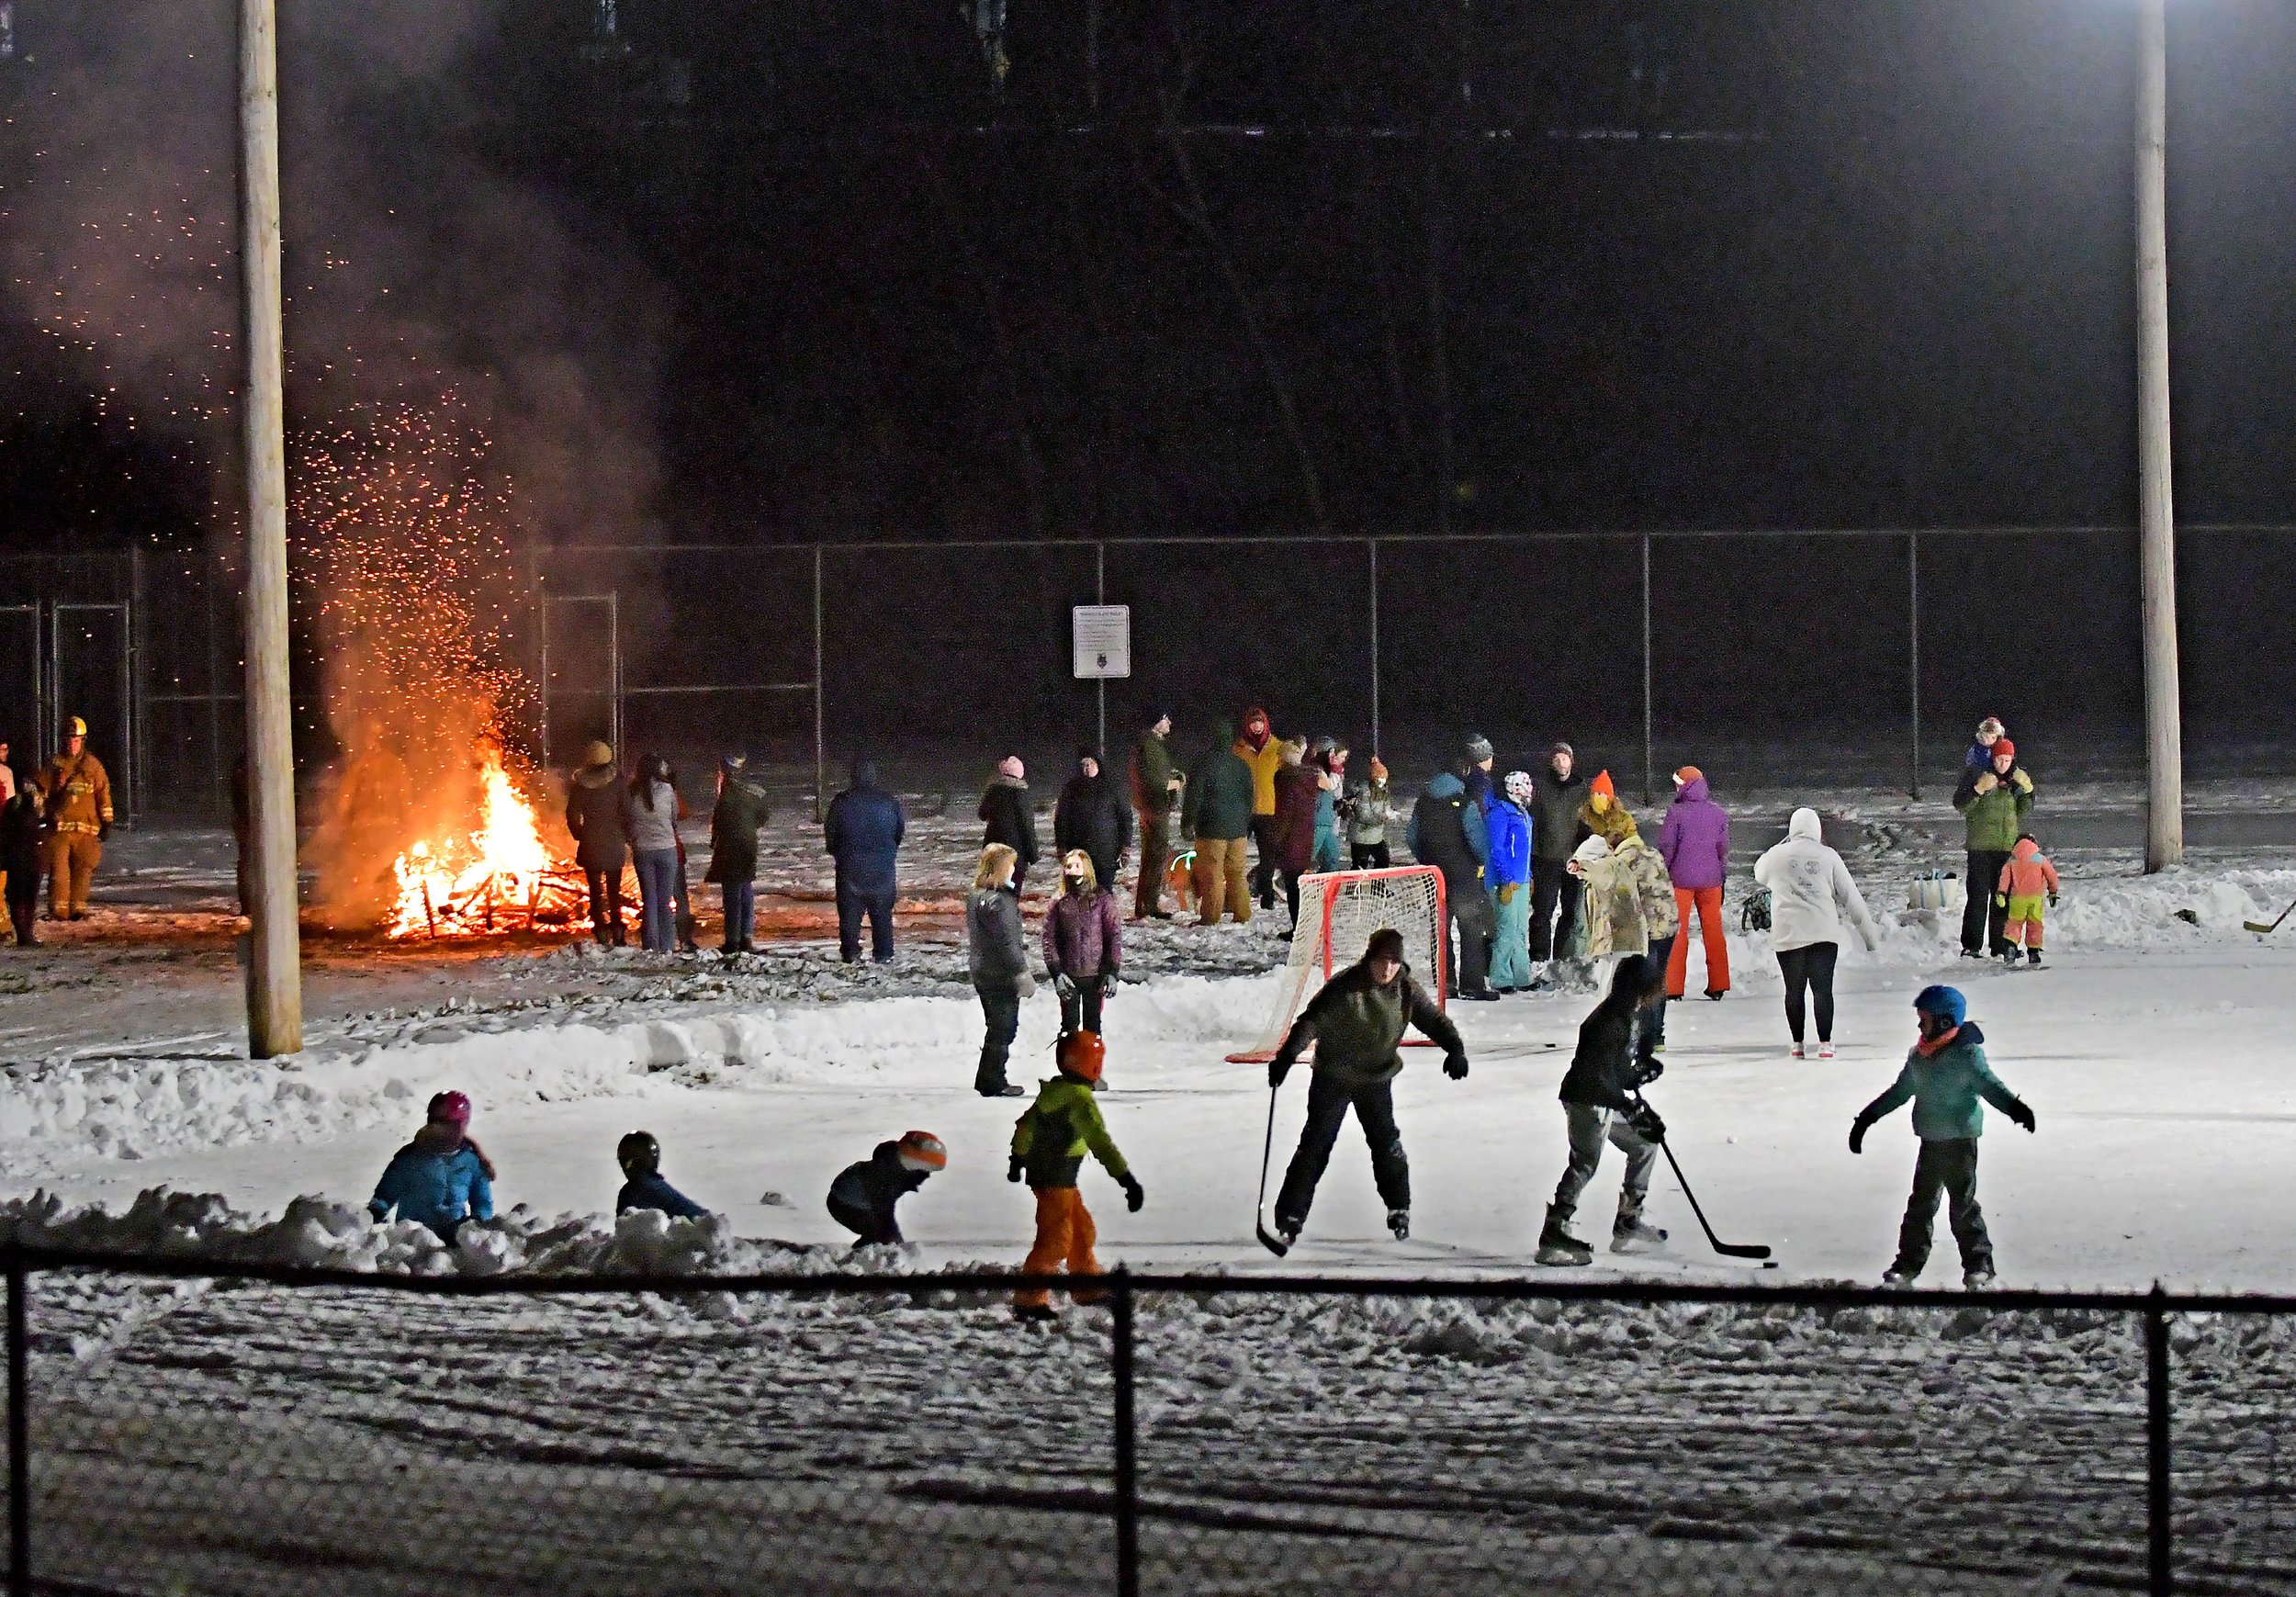  The bonfire attracts a crowd to both the fire and the nearby ice. Photo by Gordon Miller 